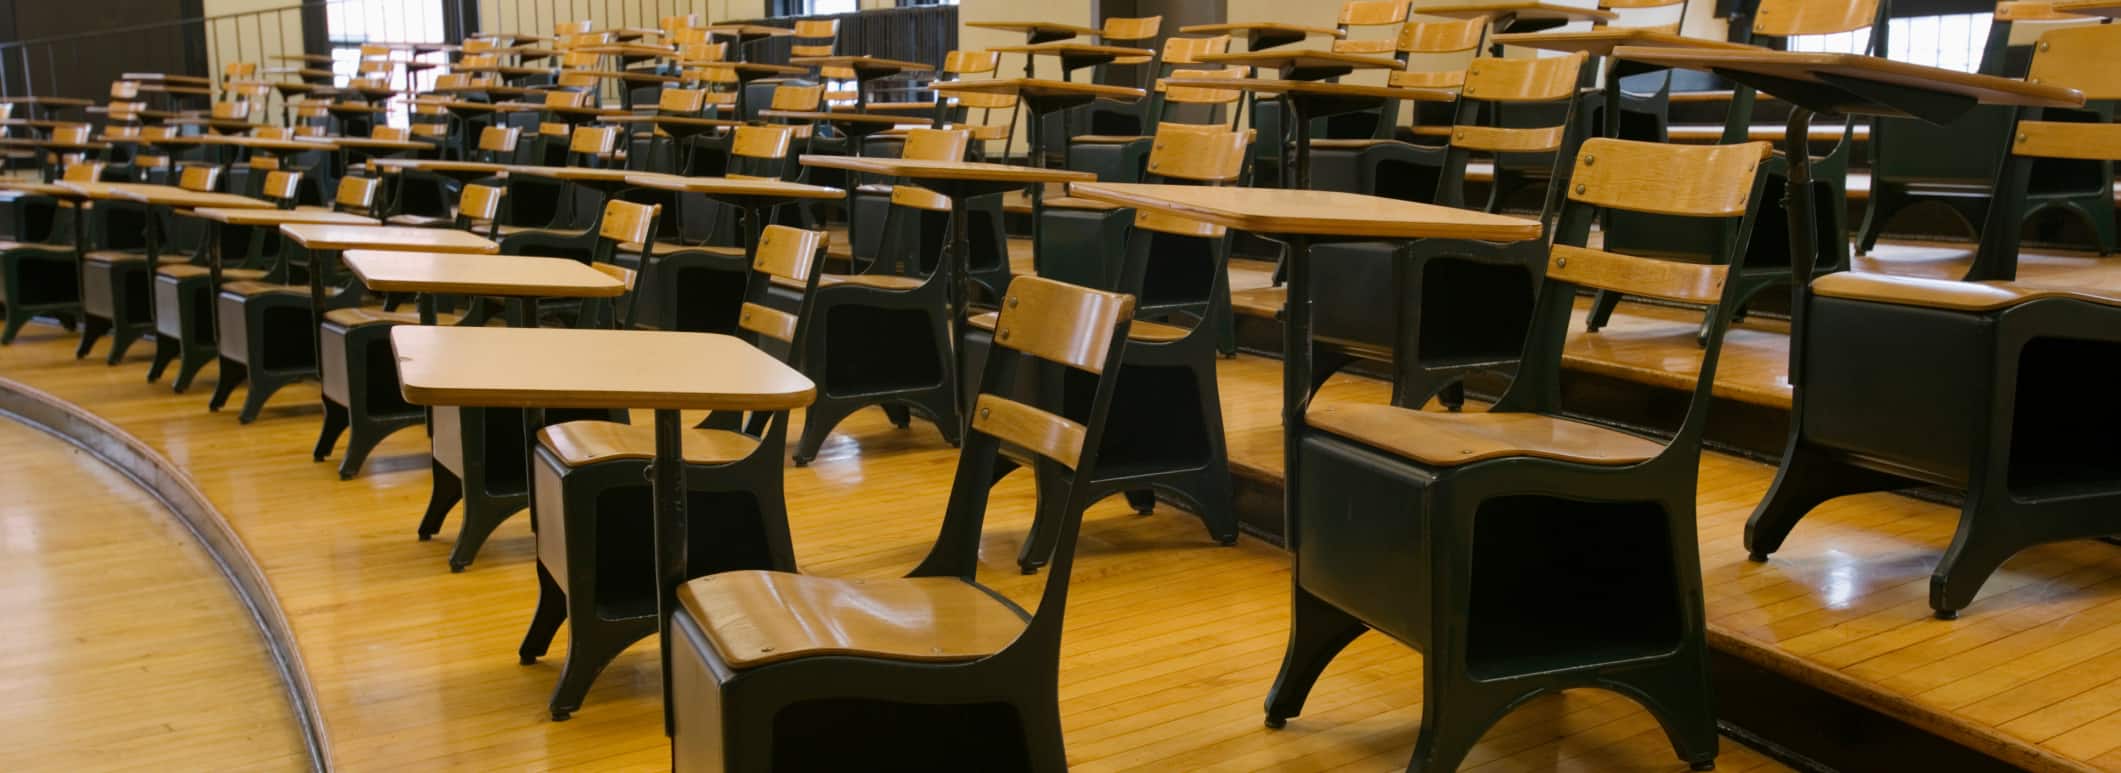 View of empty college classroom with black and tan chair desks on polished wooden tiers.